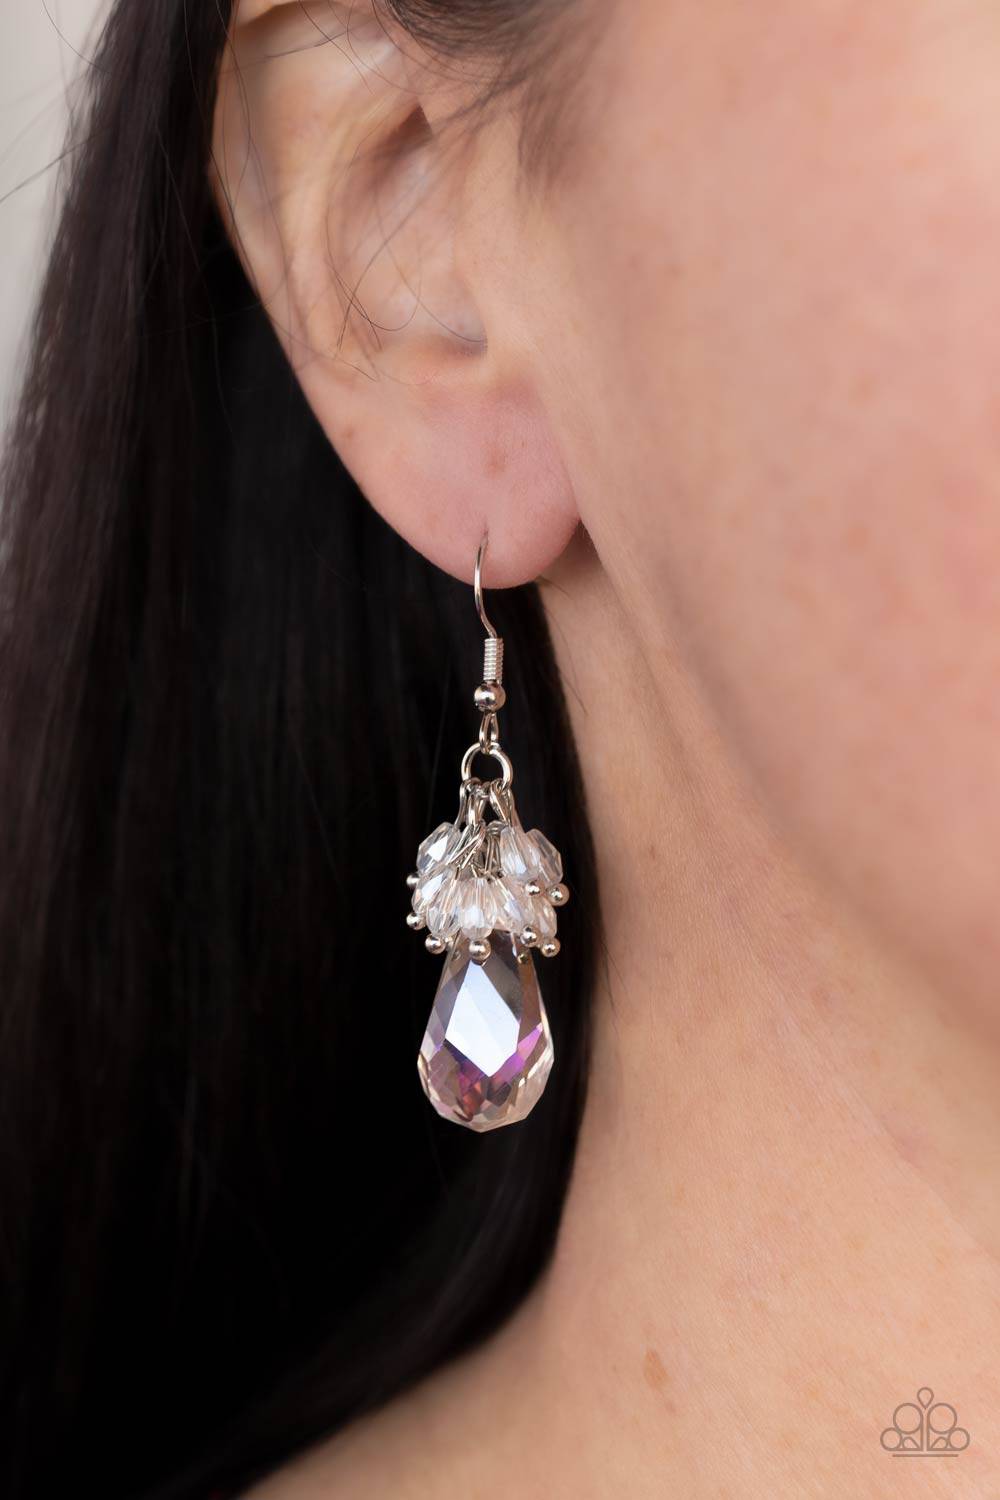 Well Versed in Sparkle - White Iridescent Beads Earrings - Paparazzi Accessories - GlaMarous Titi Jewels